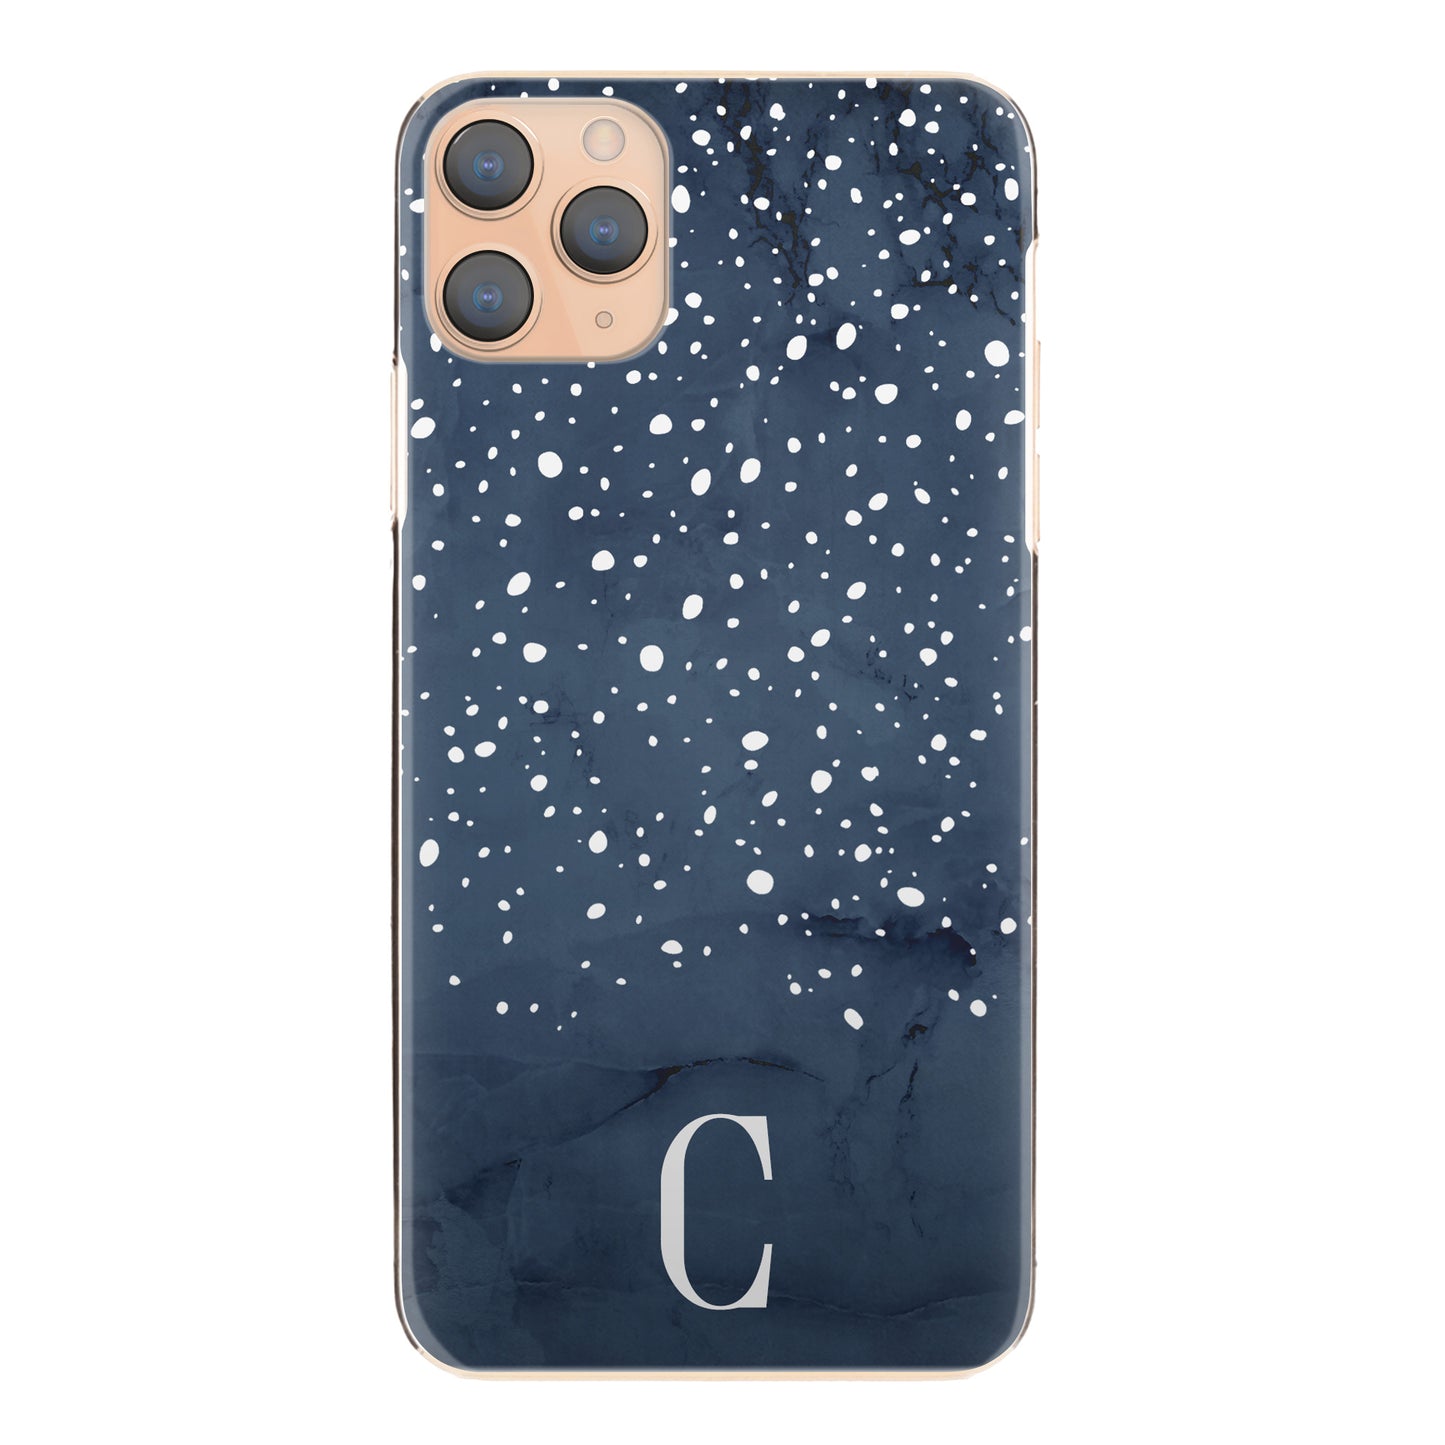 Personalised Nokia Phone Hard Case with Classy Initials on Blue Marble and White Dots